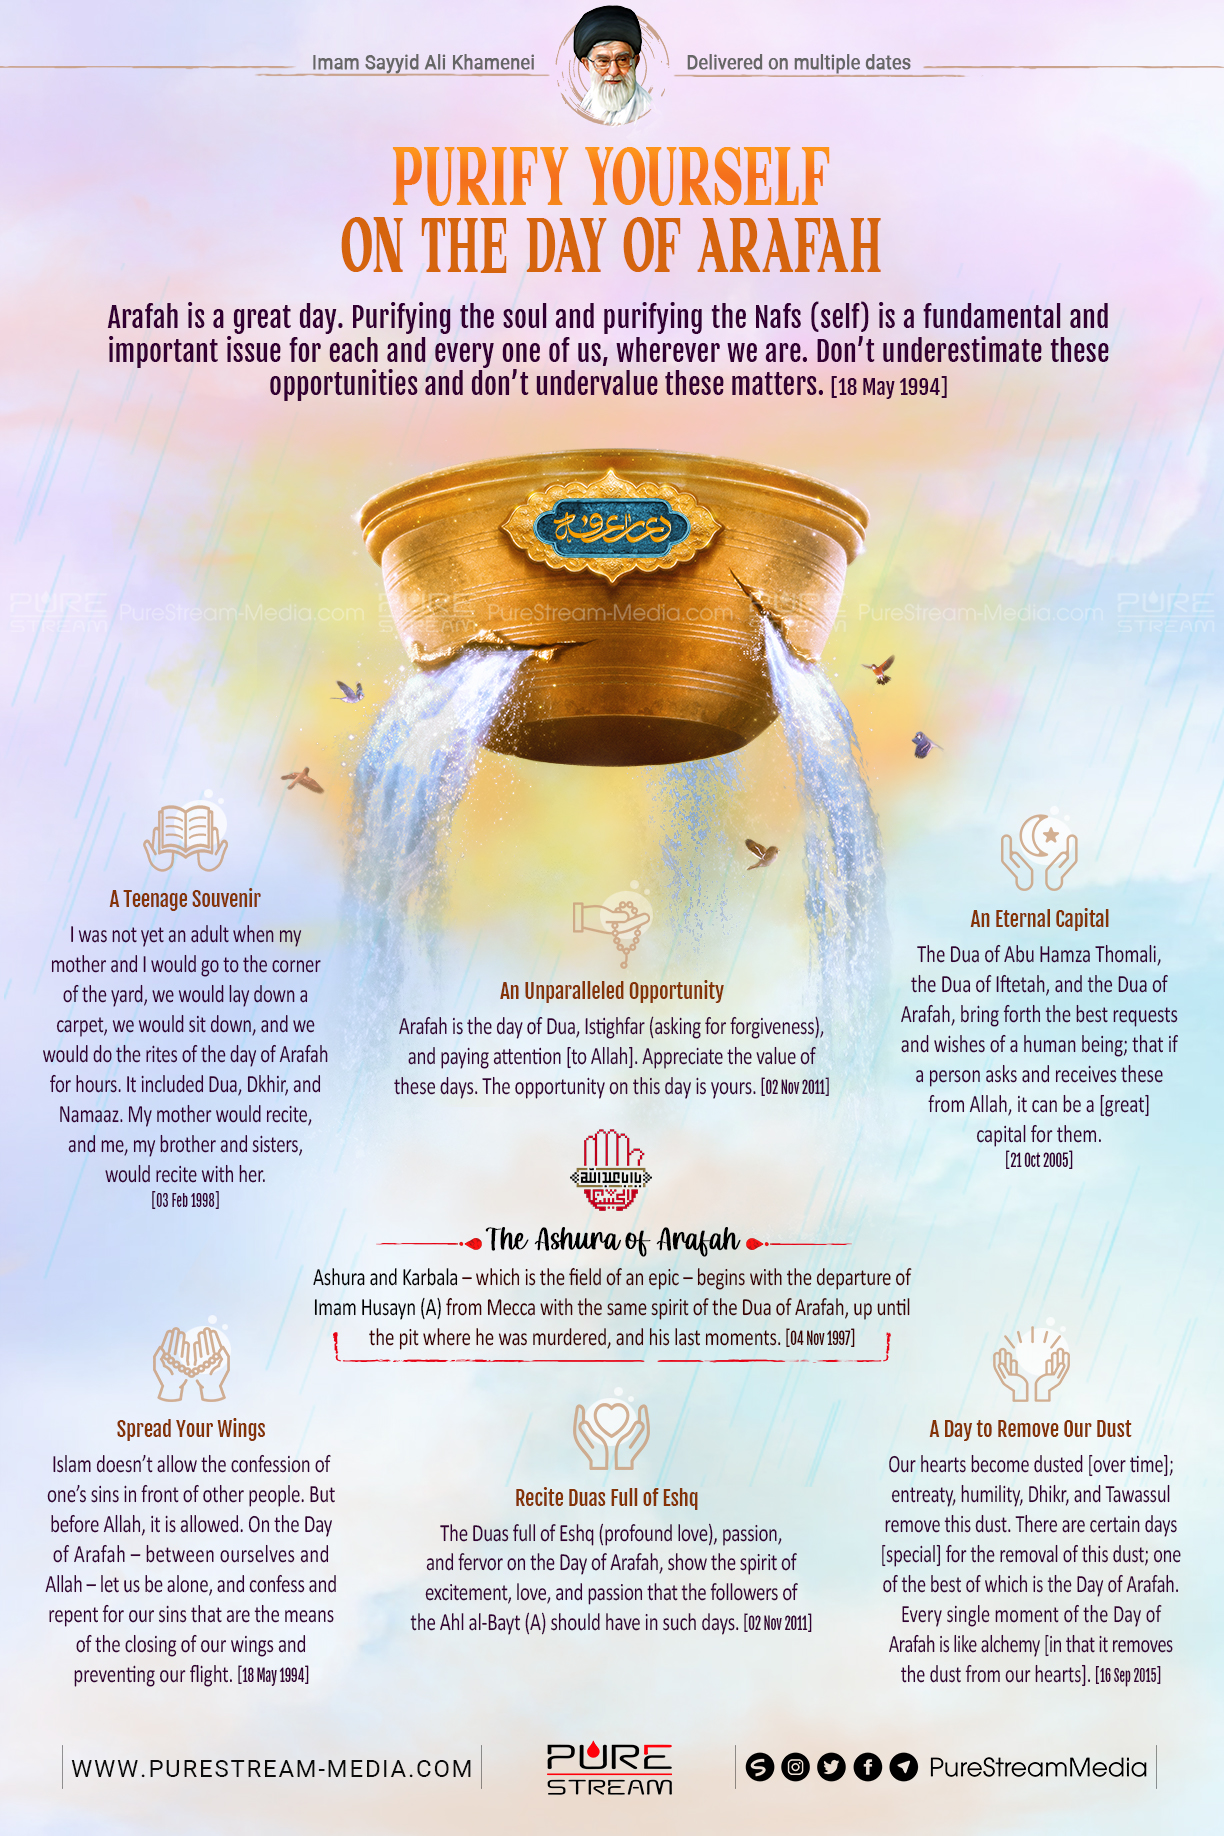 Purify Yourself on the Day of Arafah | Infographic